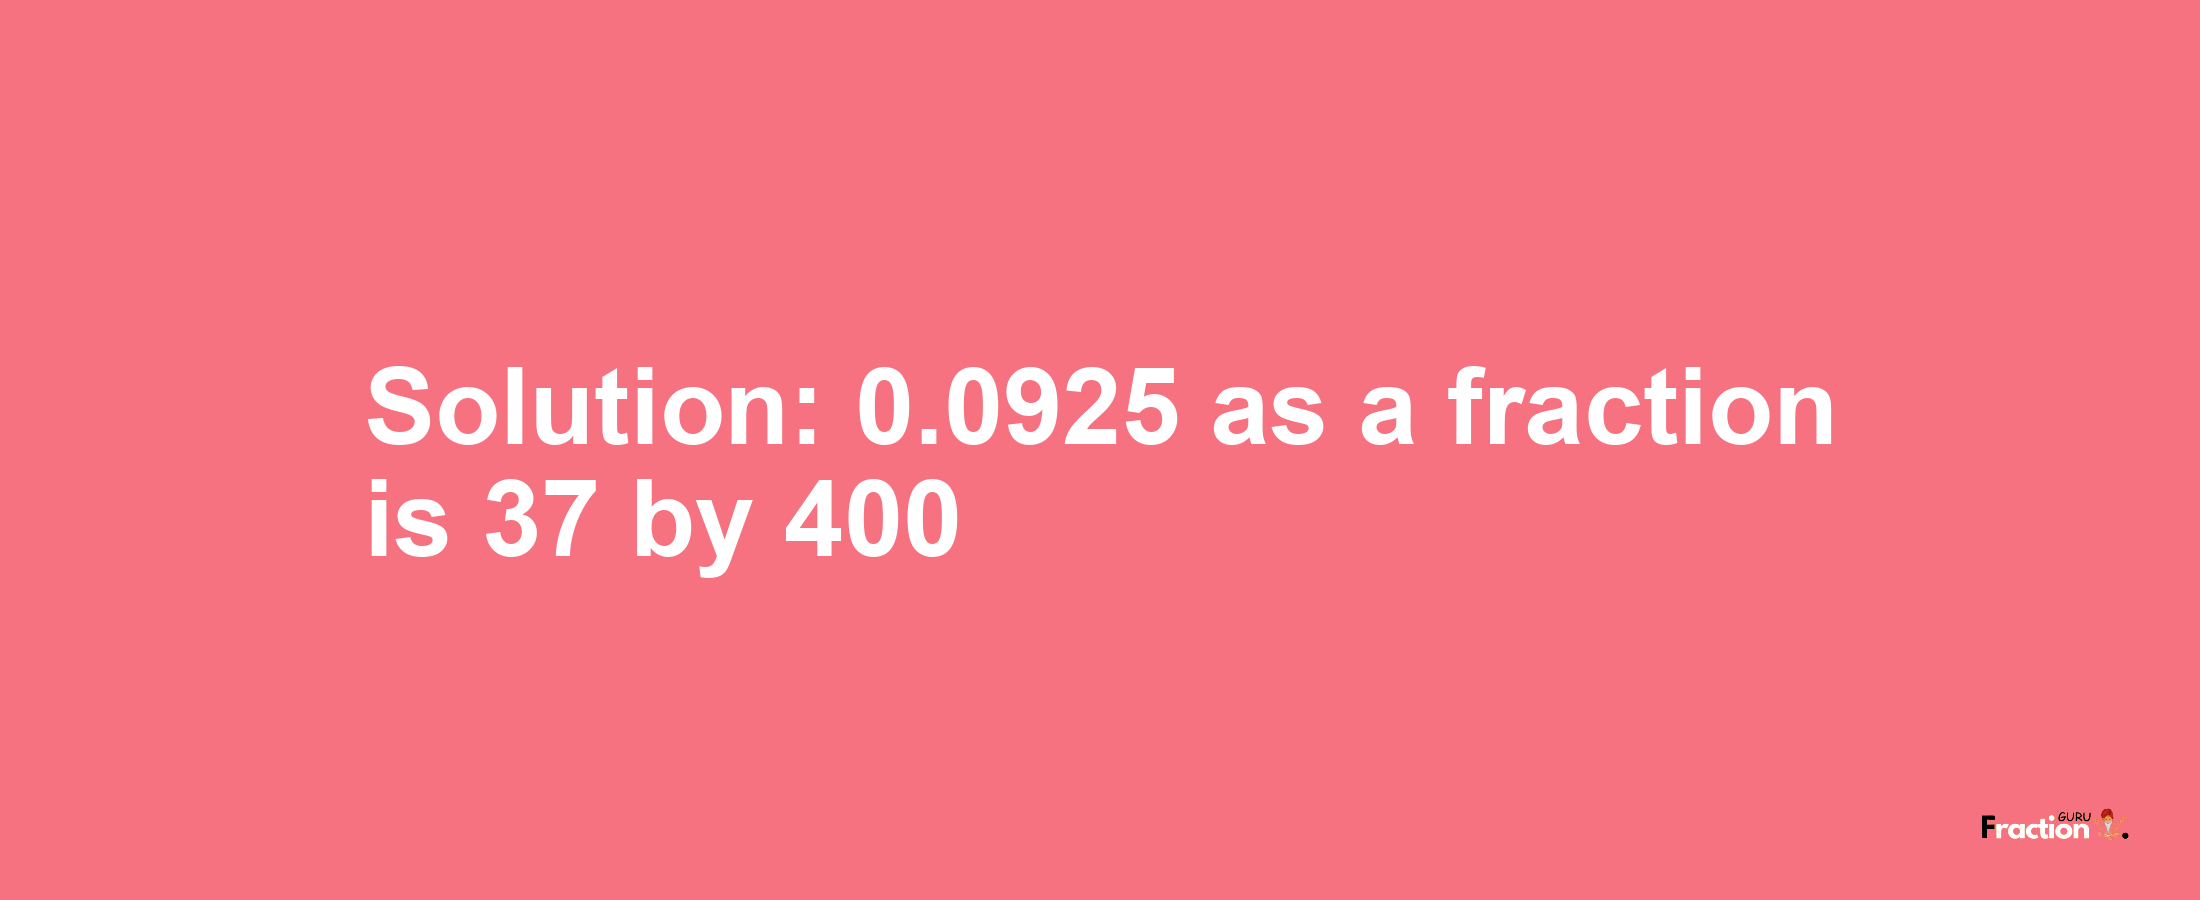 Solution:0.0925 as a fraction is 37/400